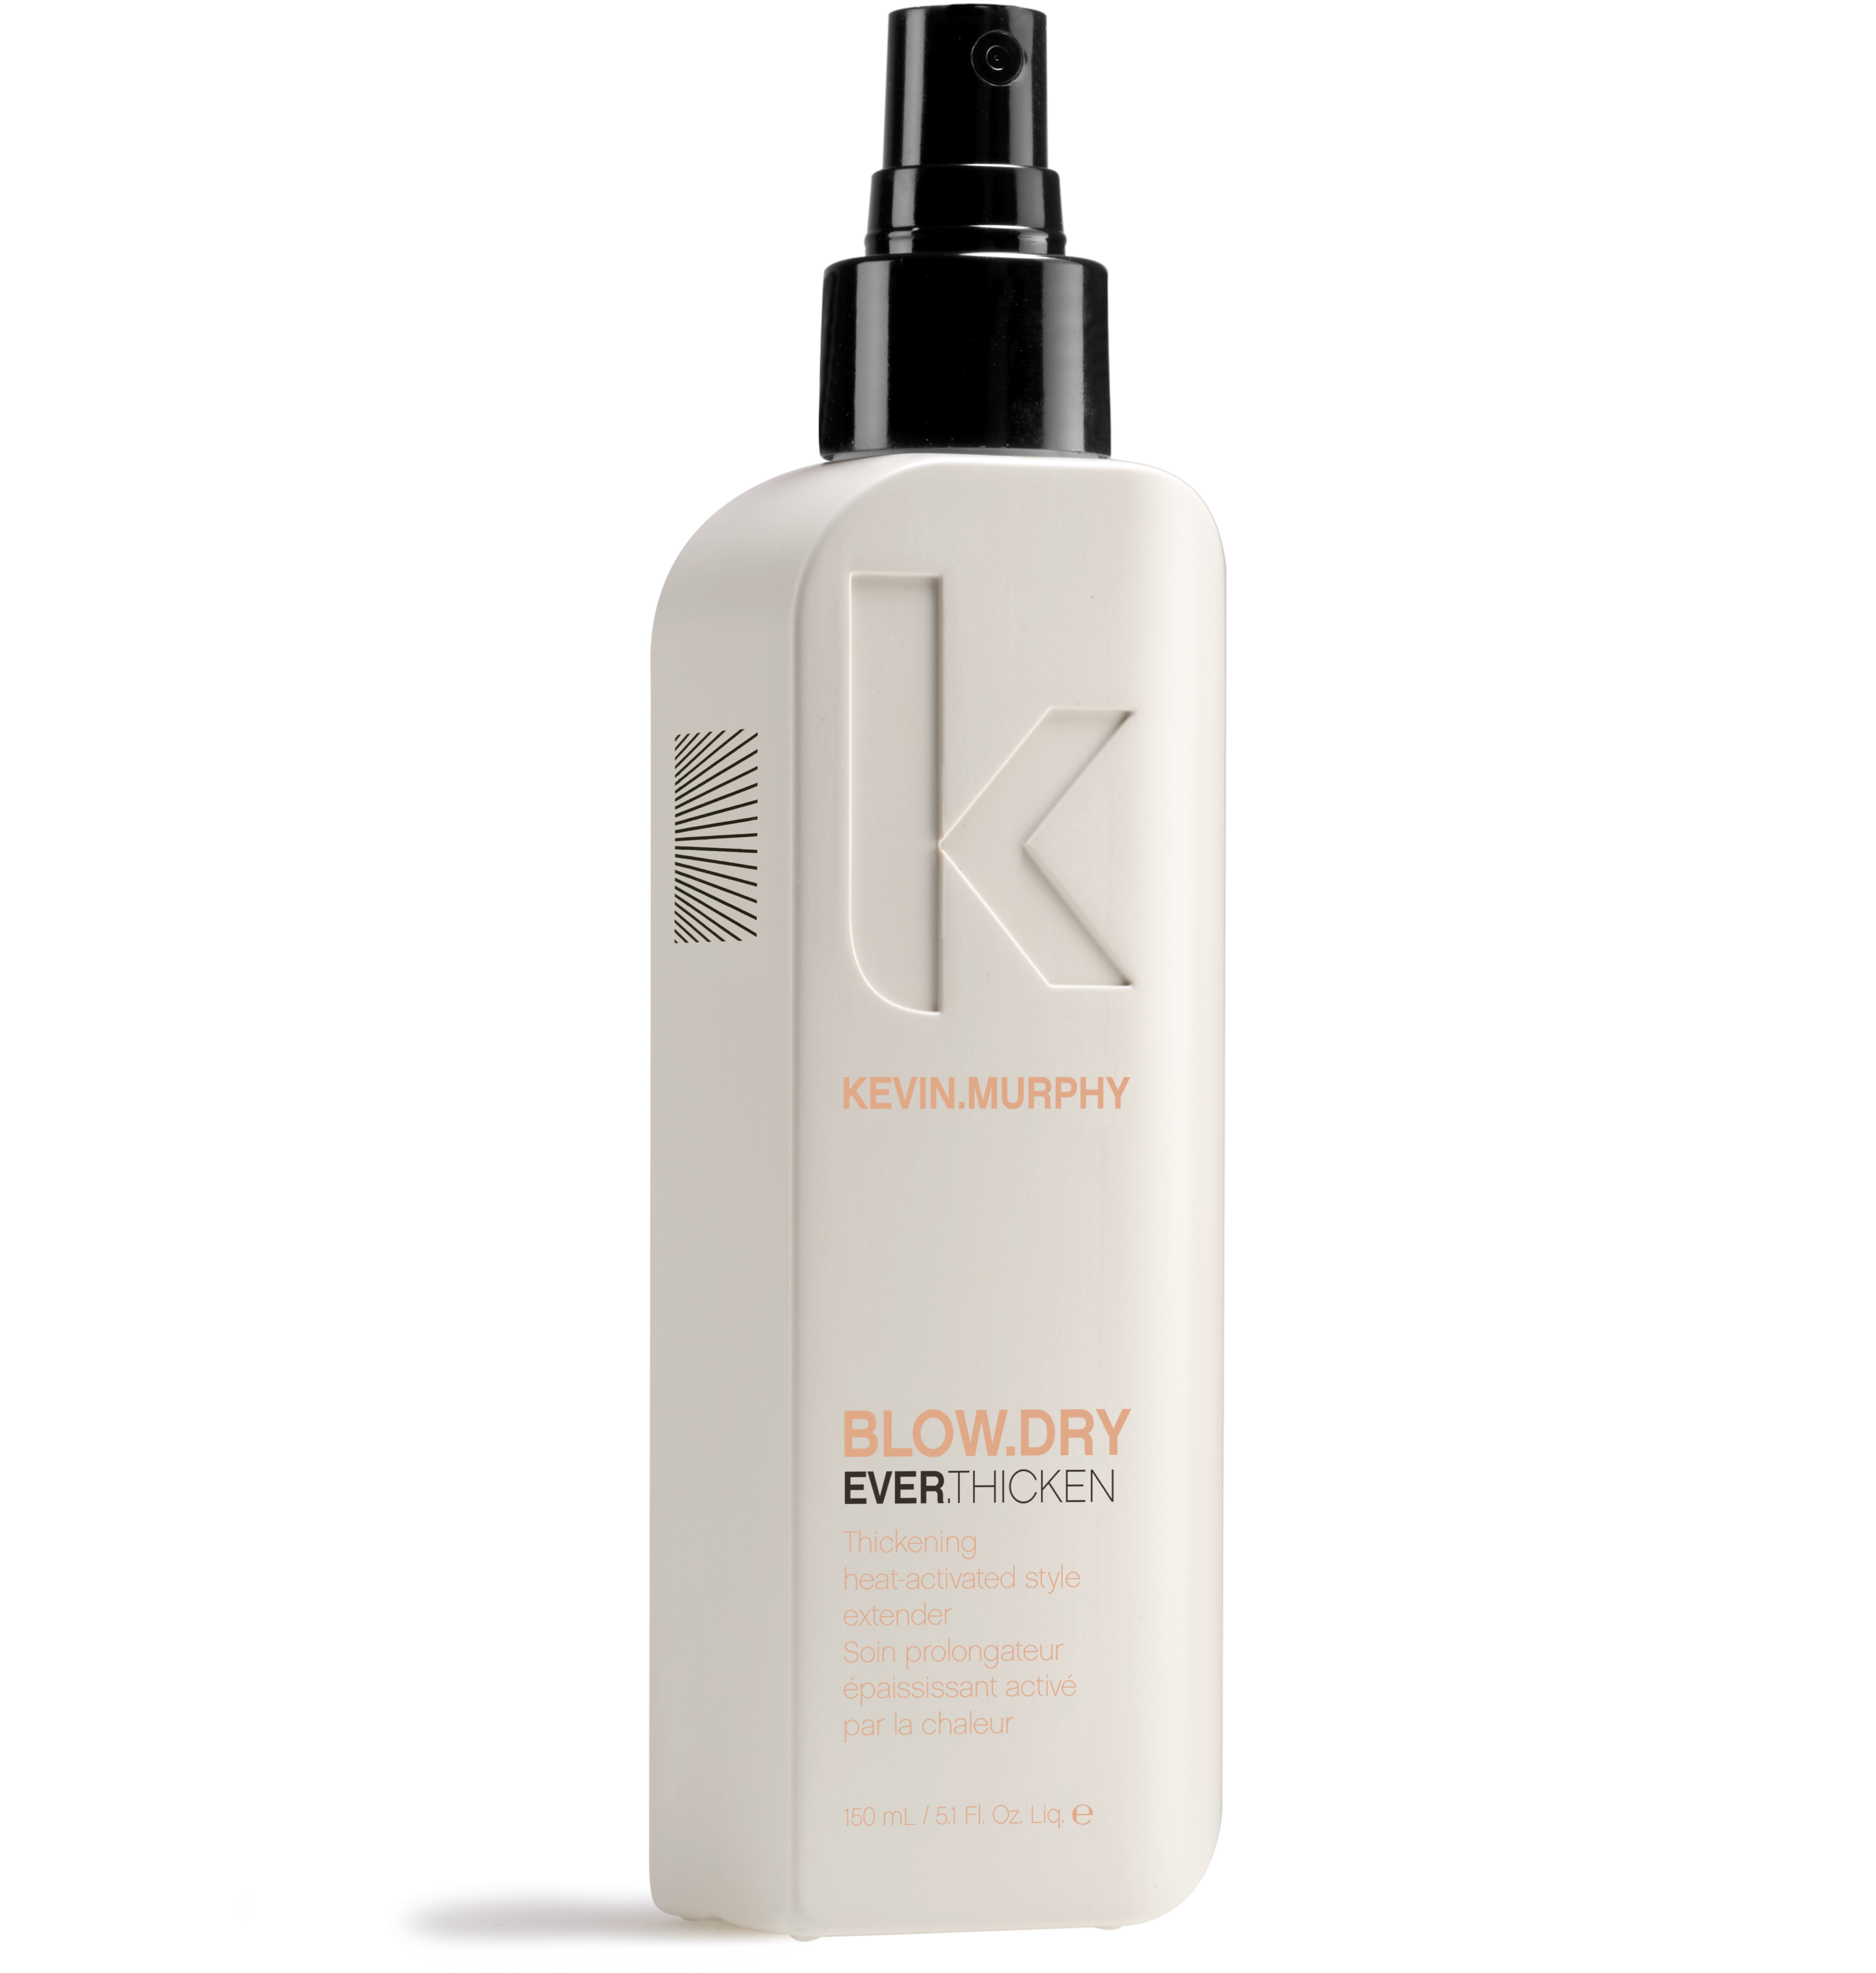 EVER THICKEN KEVIN MURPHY SECADO BLOW DRY